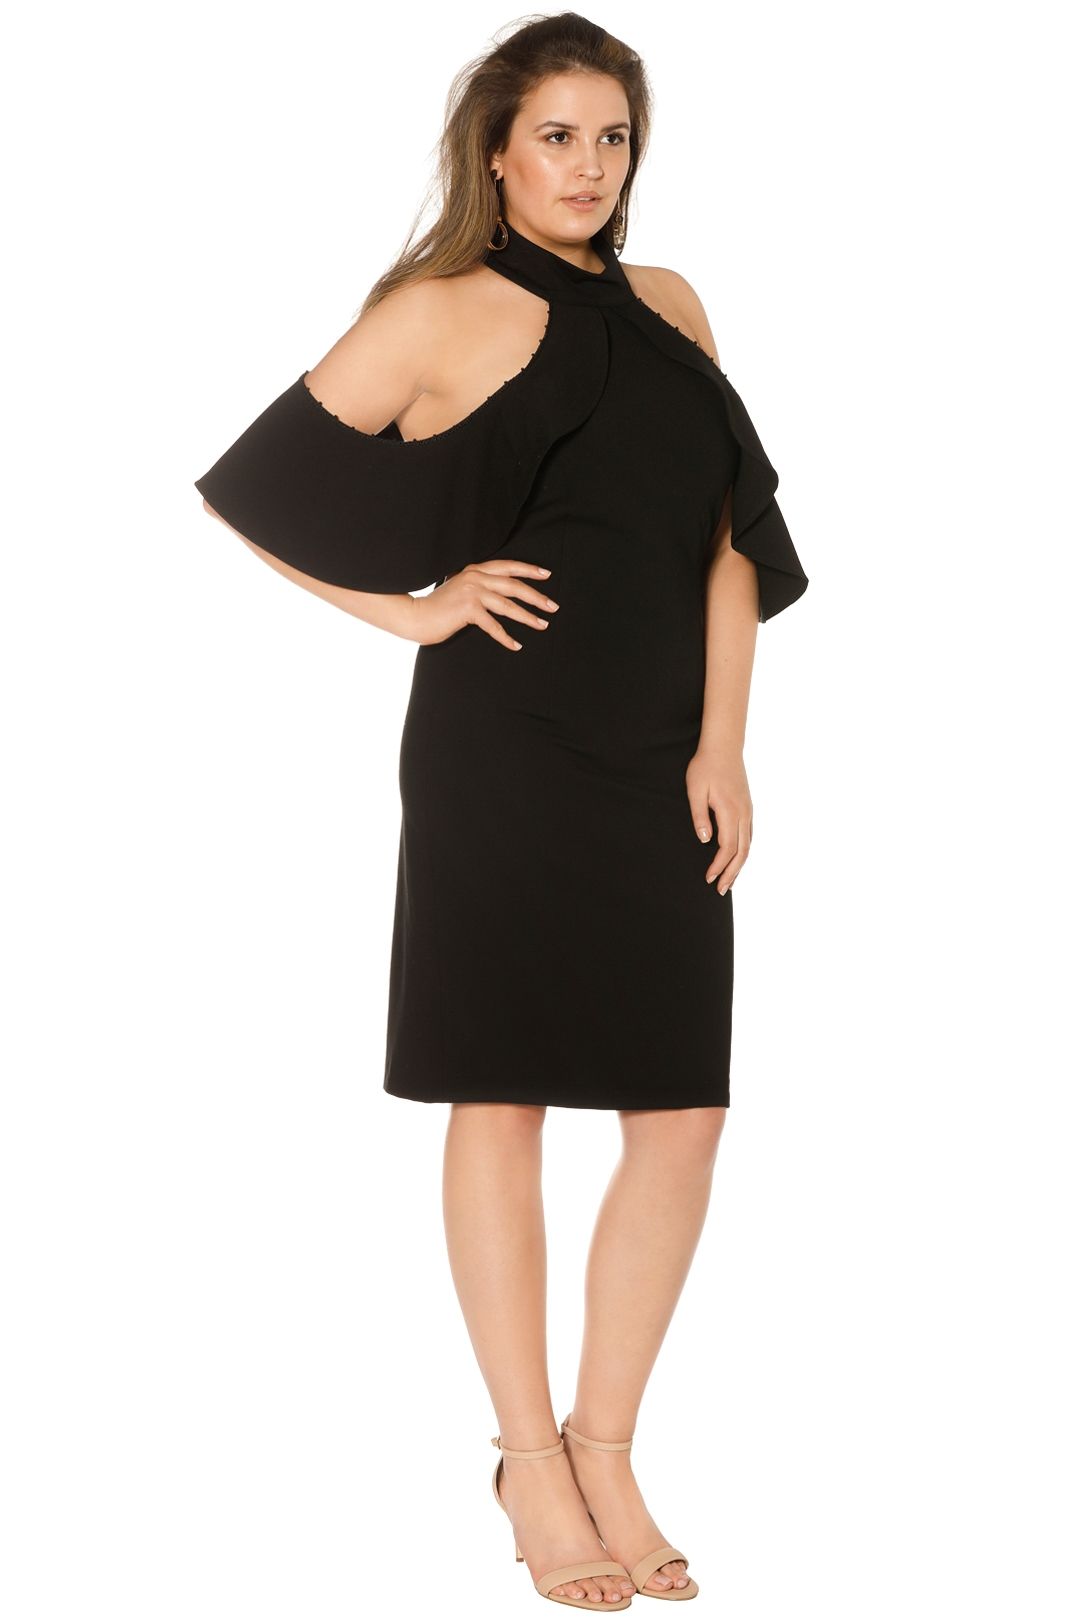 Blessed are the Meek  - Isadora Dress - Black - Front  